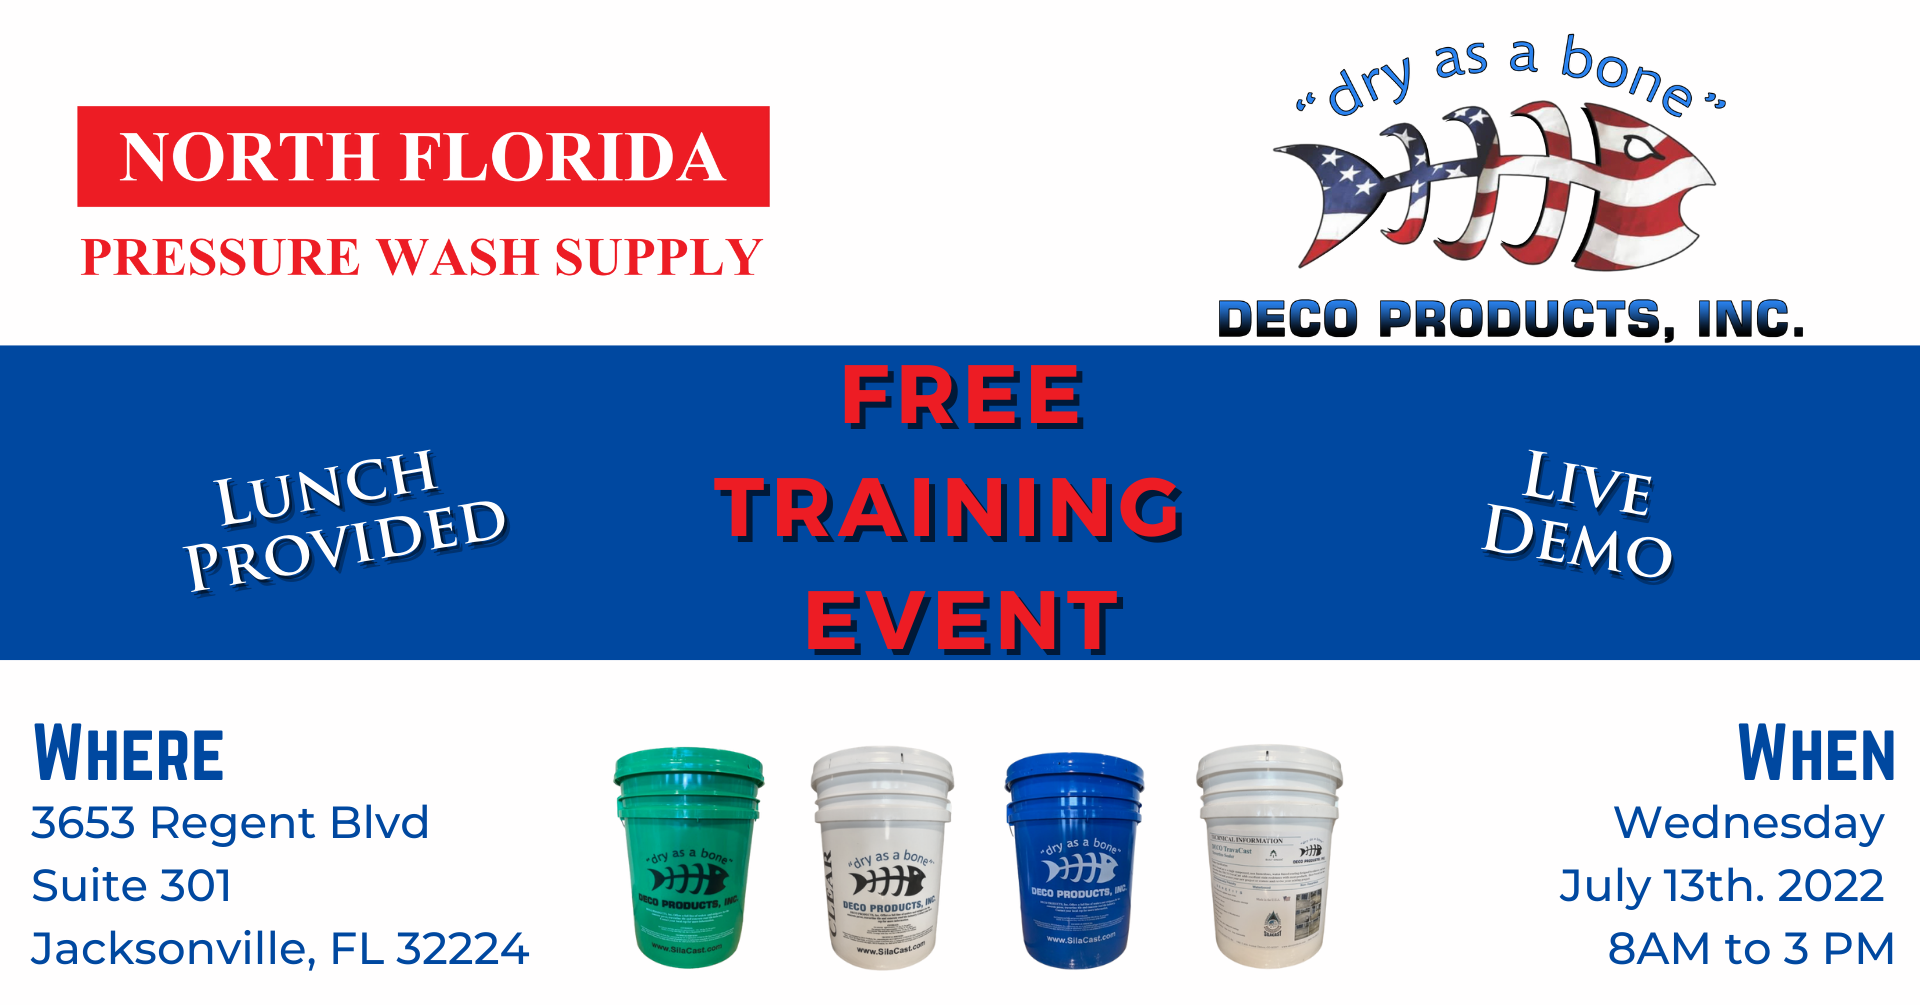 a flyer promoting a free training even in Florida